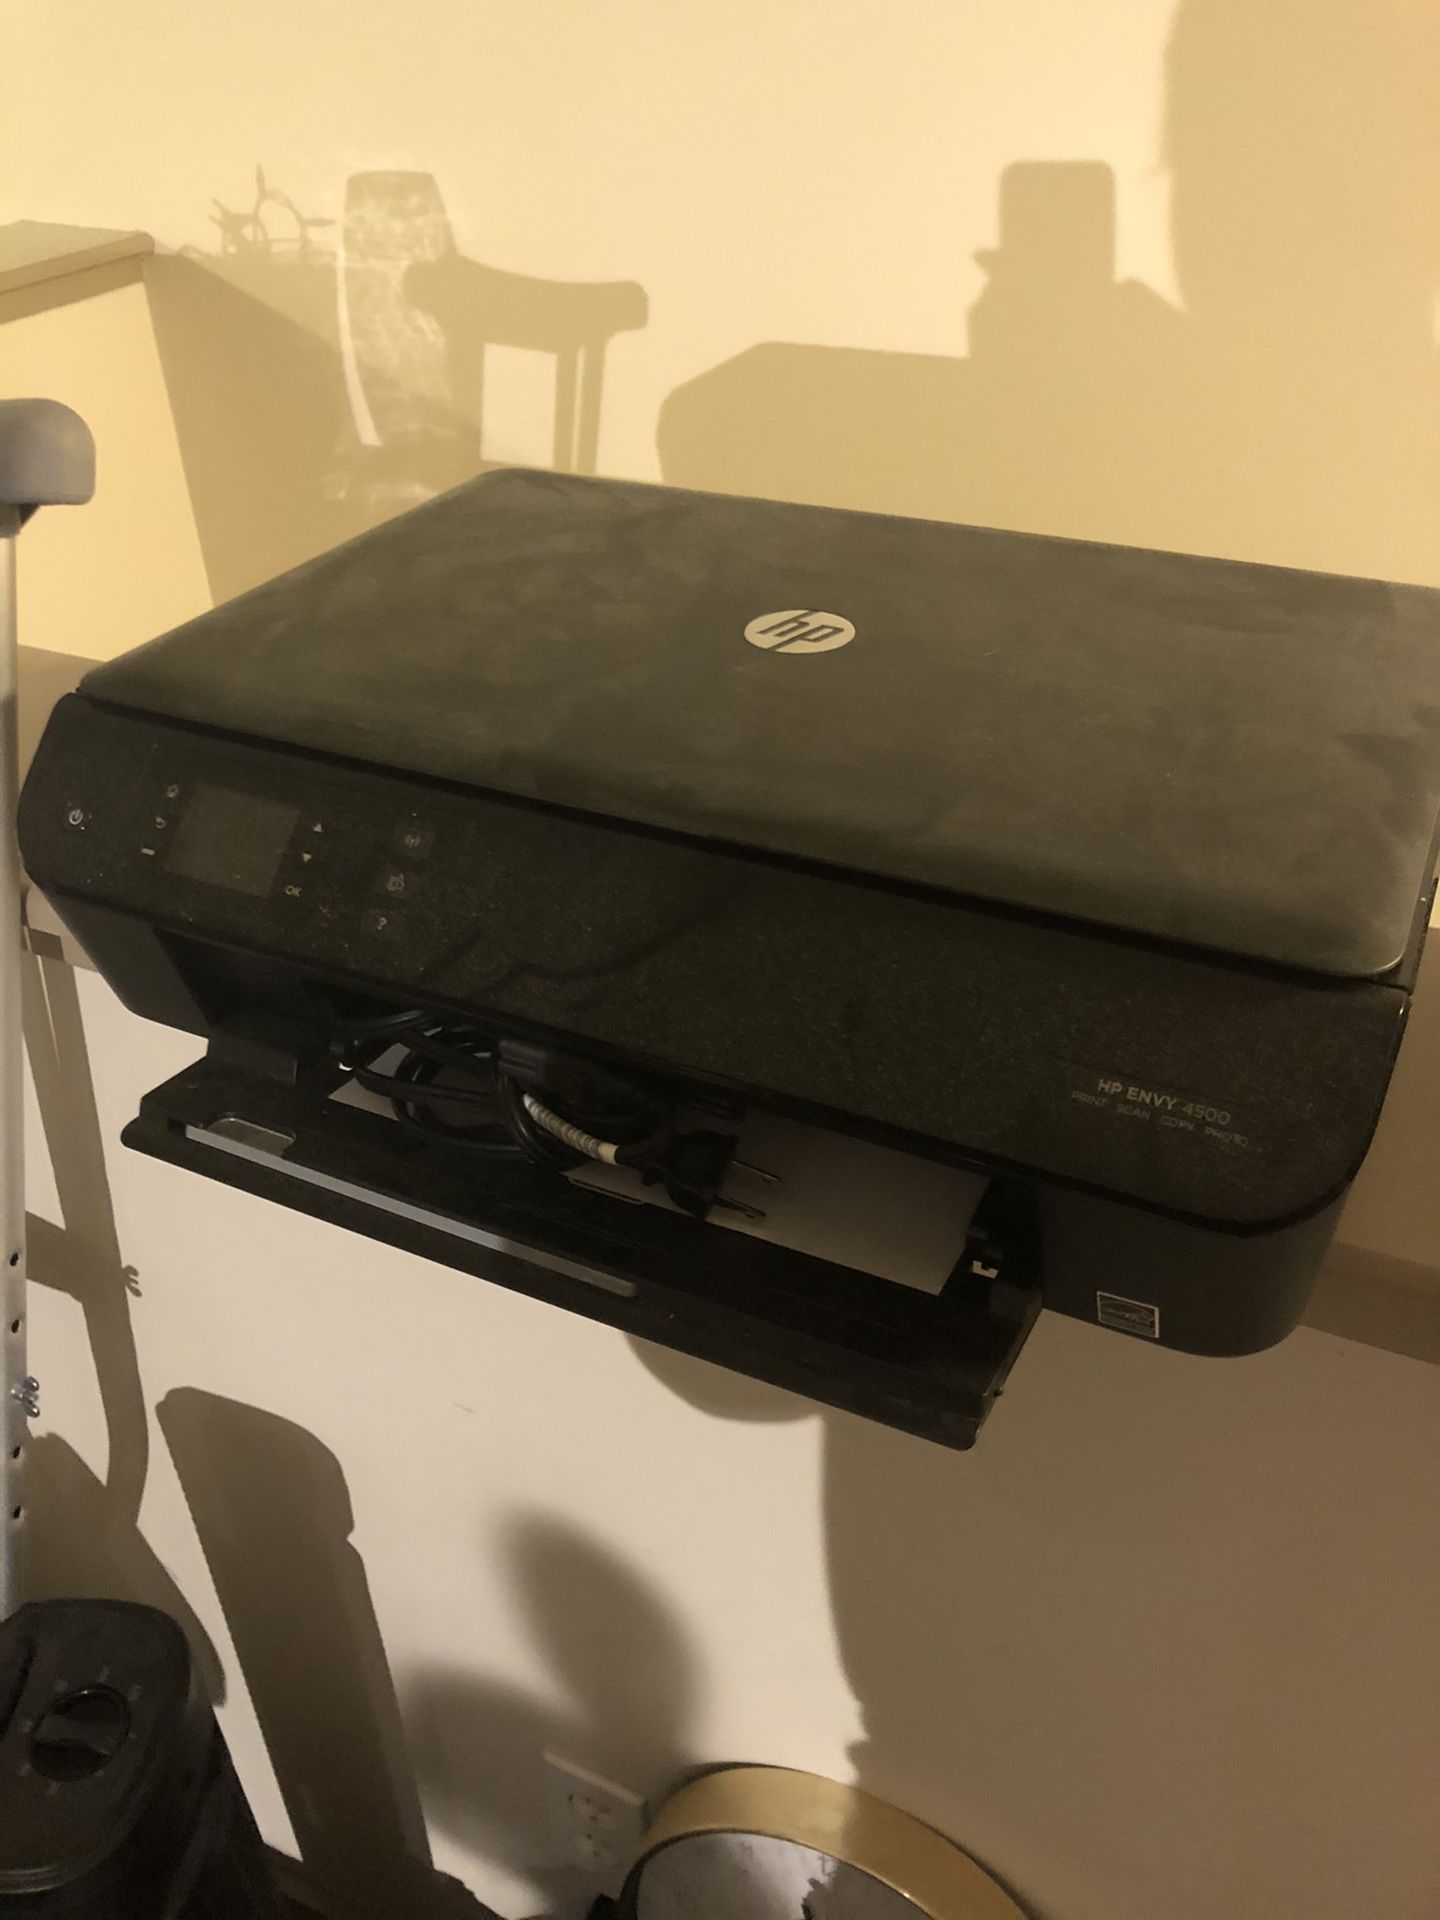 HP All in One Wireless Printer